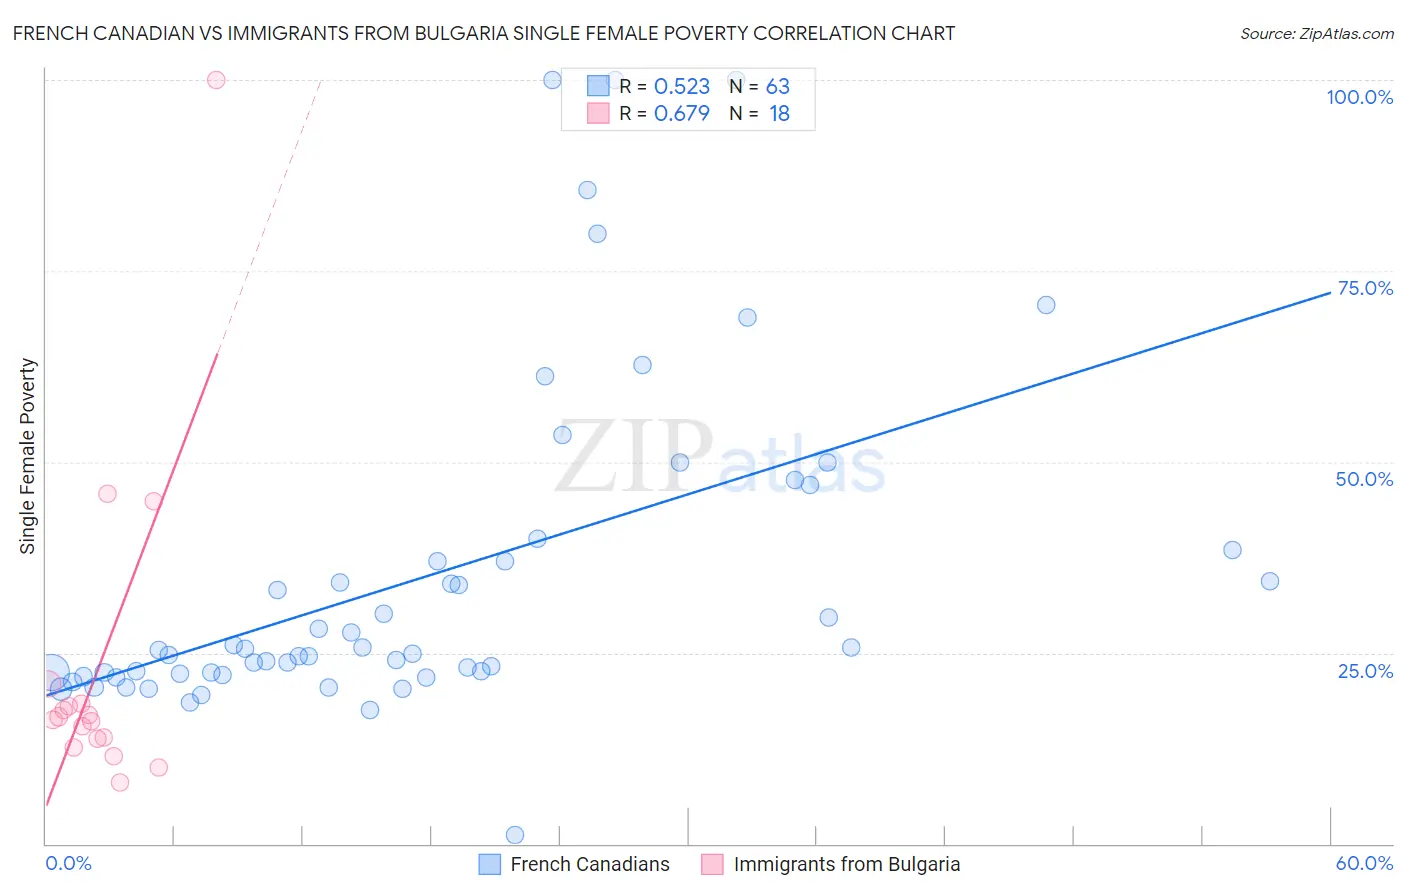 French Canadian vs Immigrants from Bulgaria Single Female Poverty